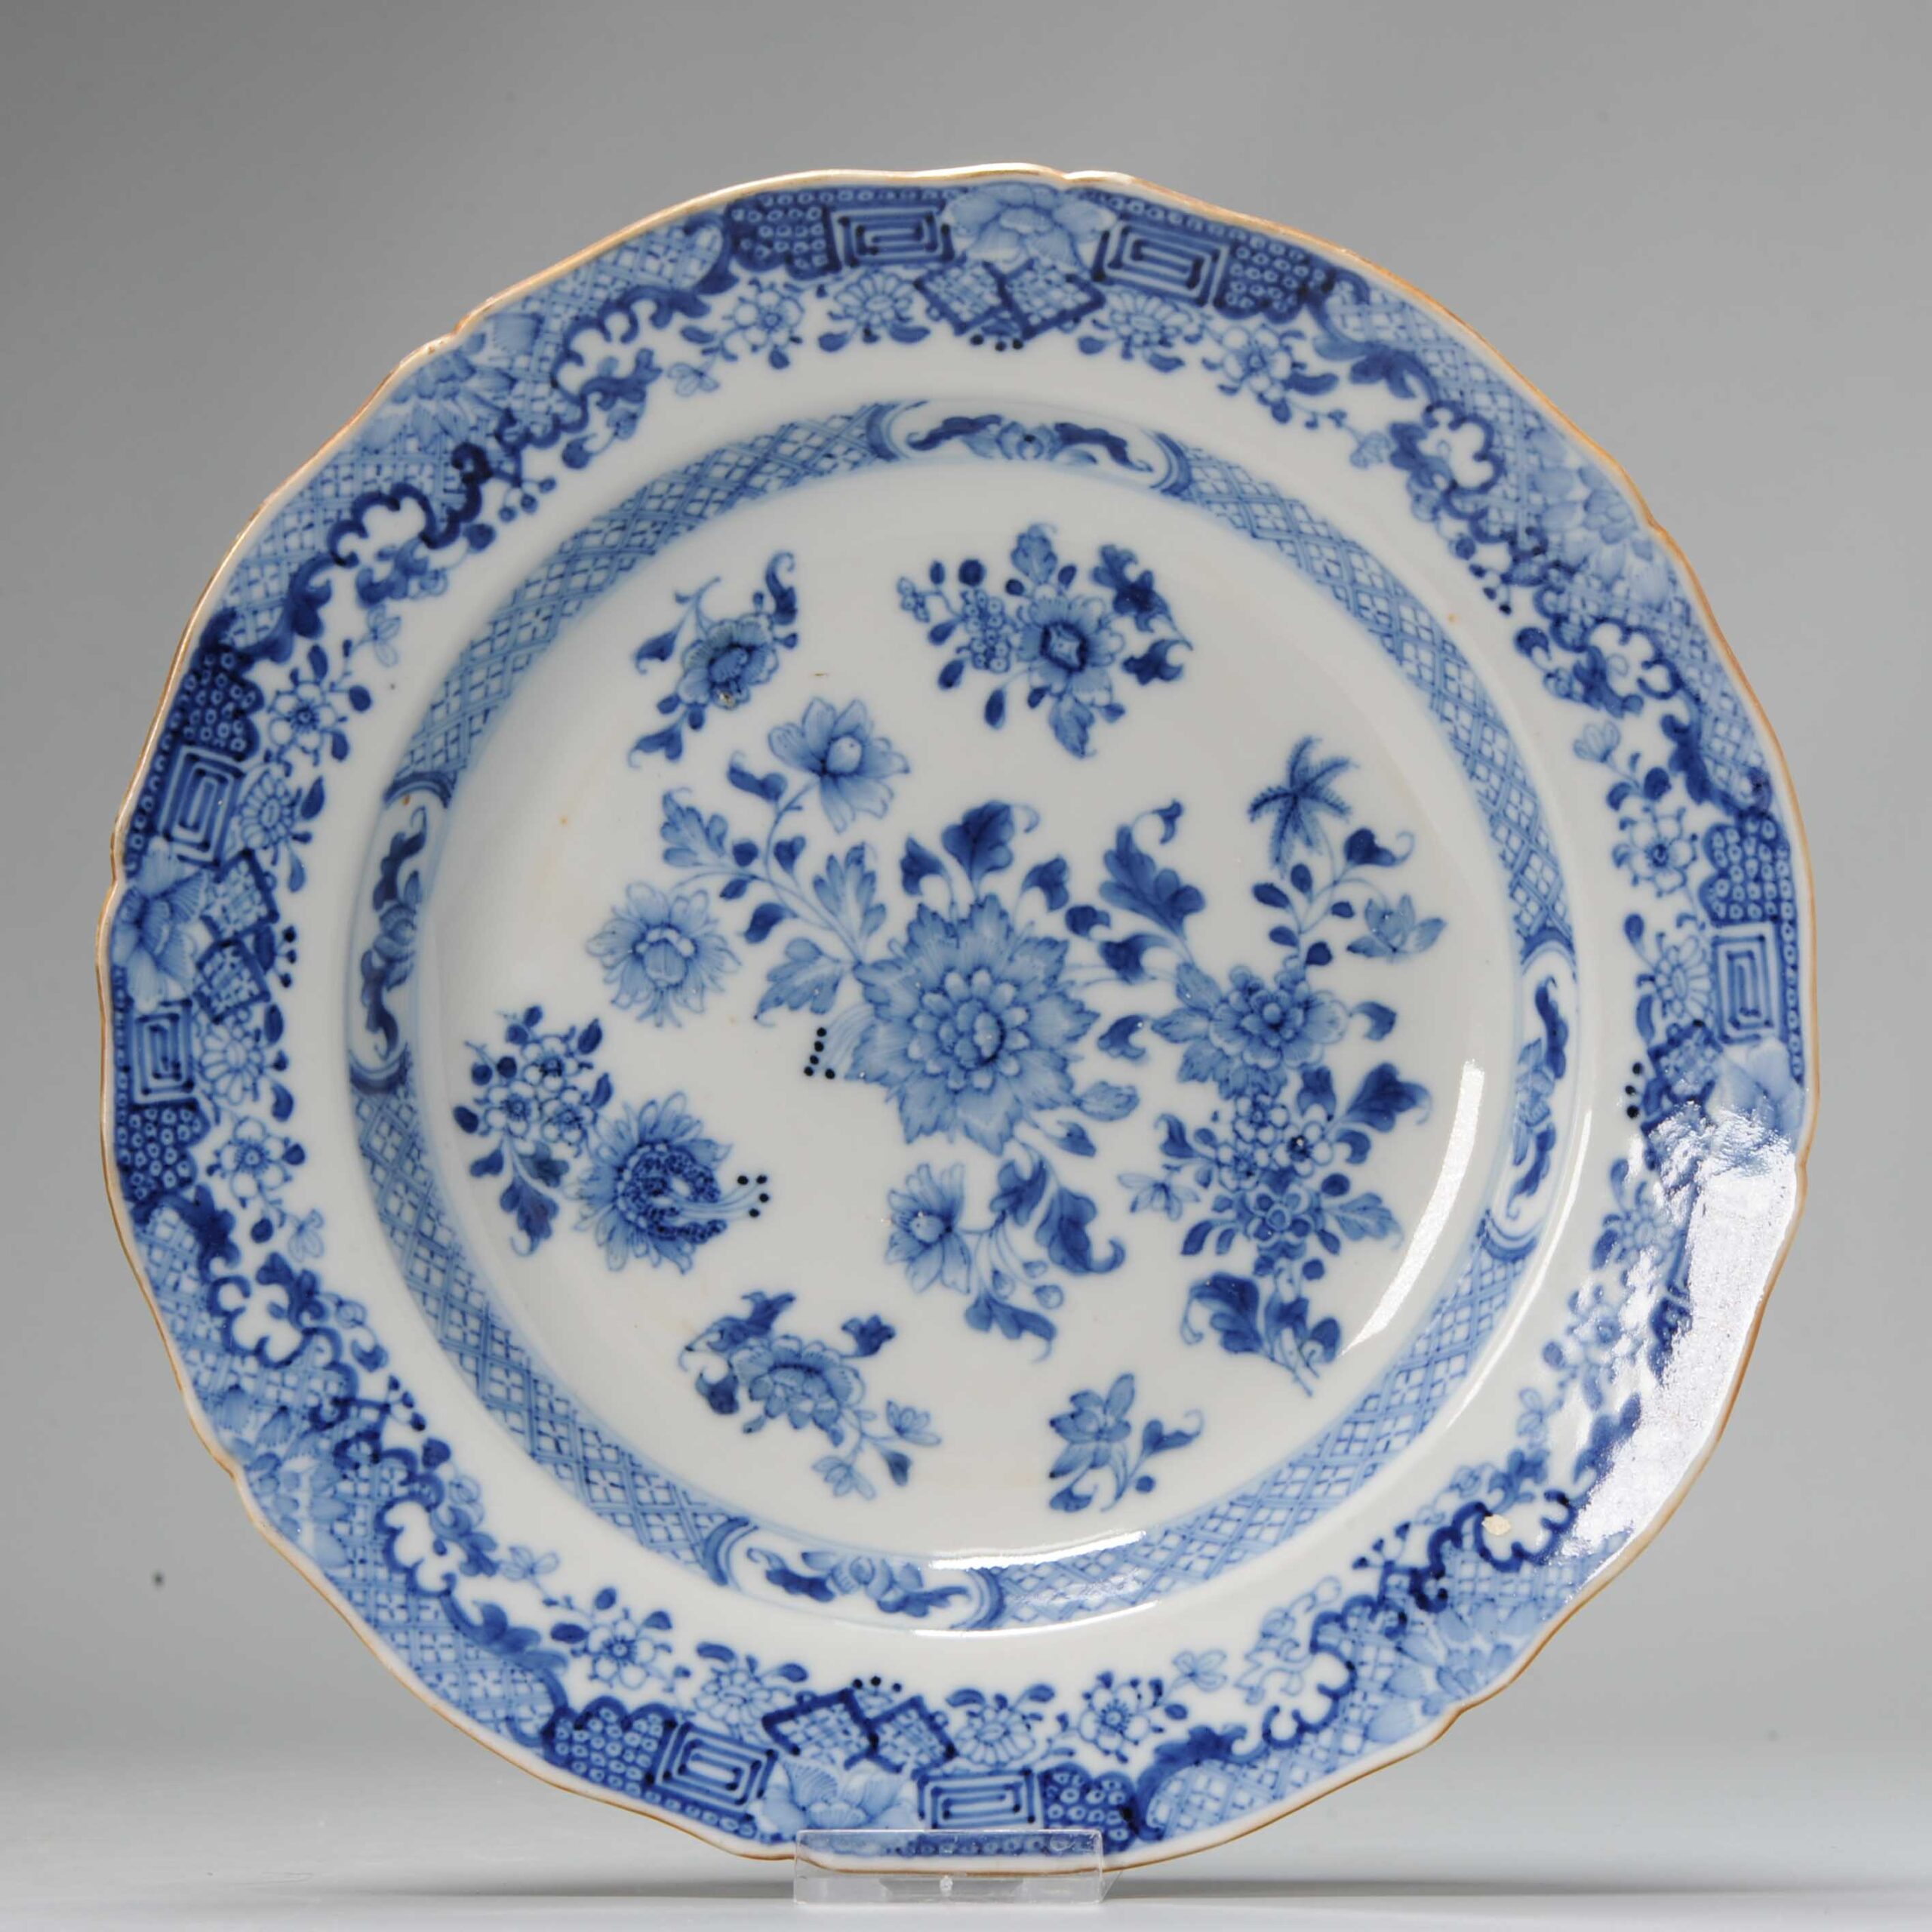 Perfect Antique high quality Chinese 18C Blue and white Garden Floral Dish